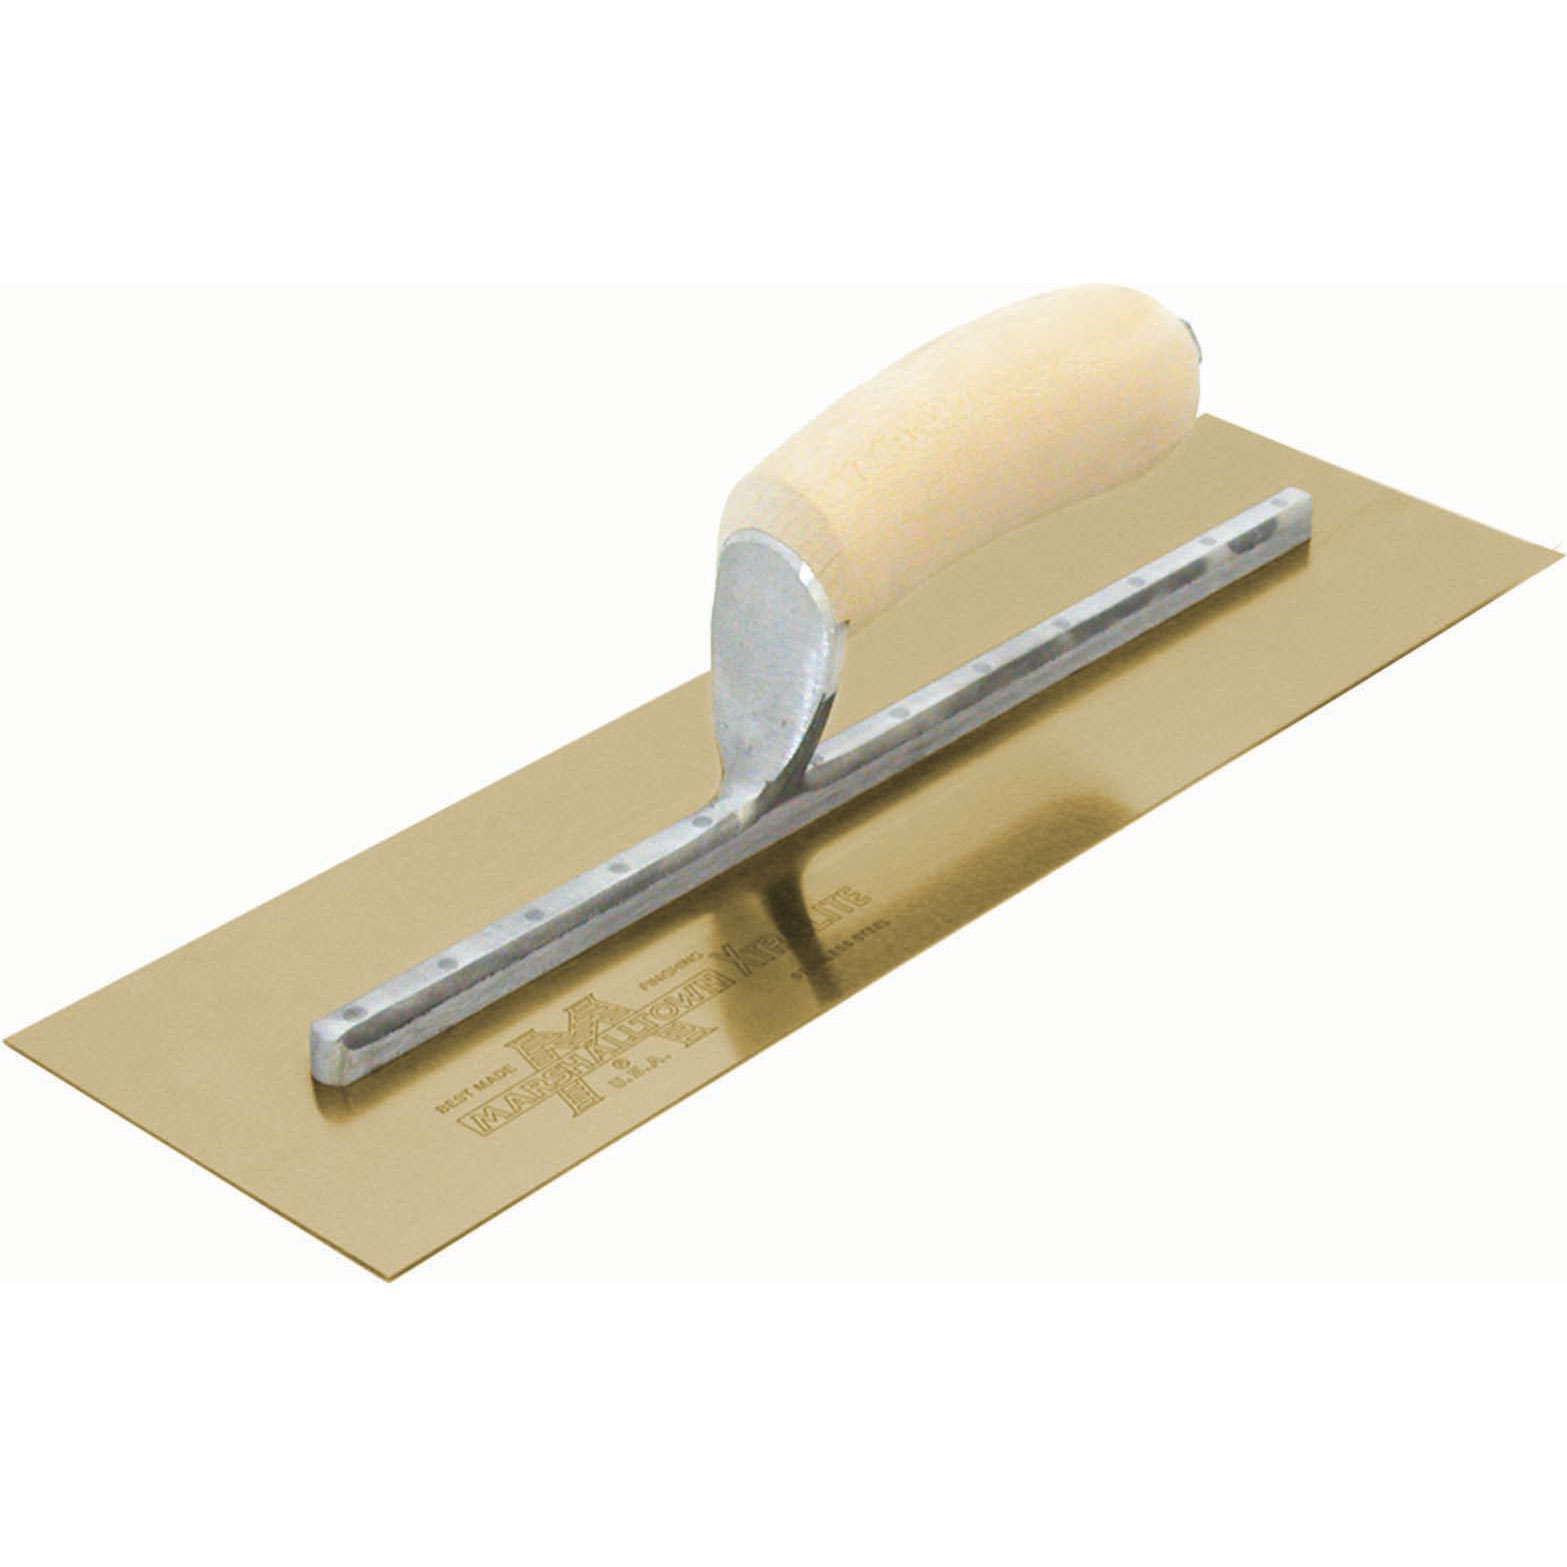 Marshalltown MXS13GS 13in X 5in Golden Stainless Finishing Trowel with Curved Wood Handle MAT-MXS13GS